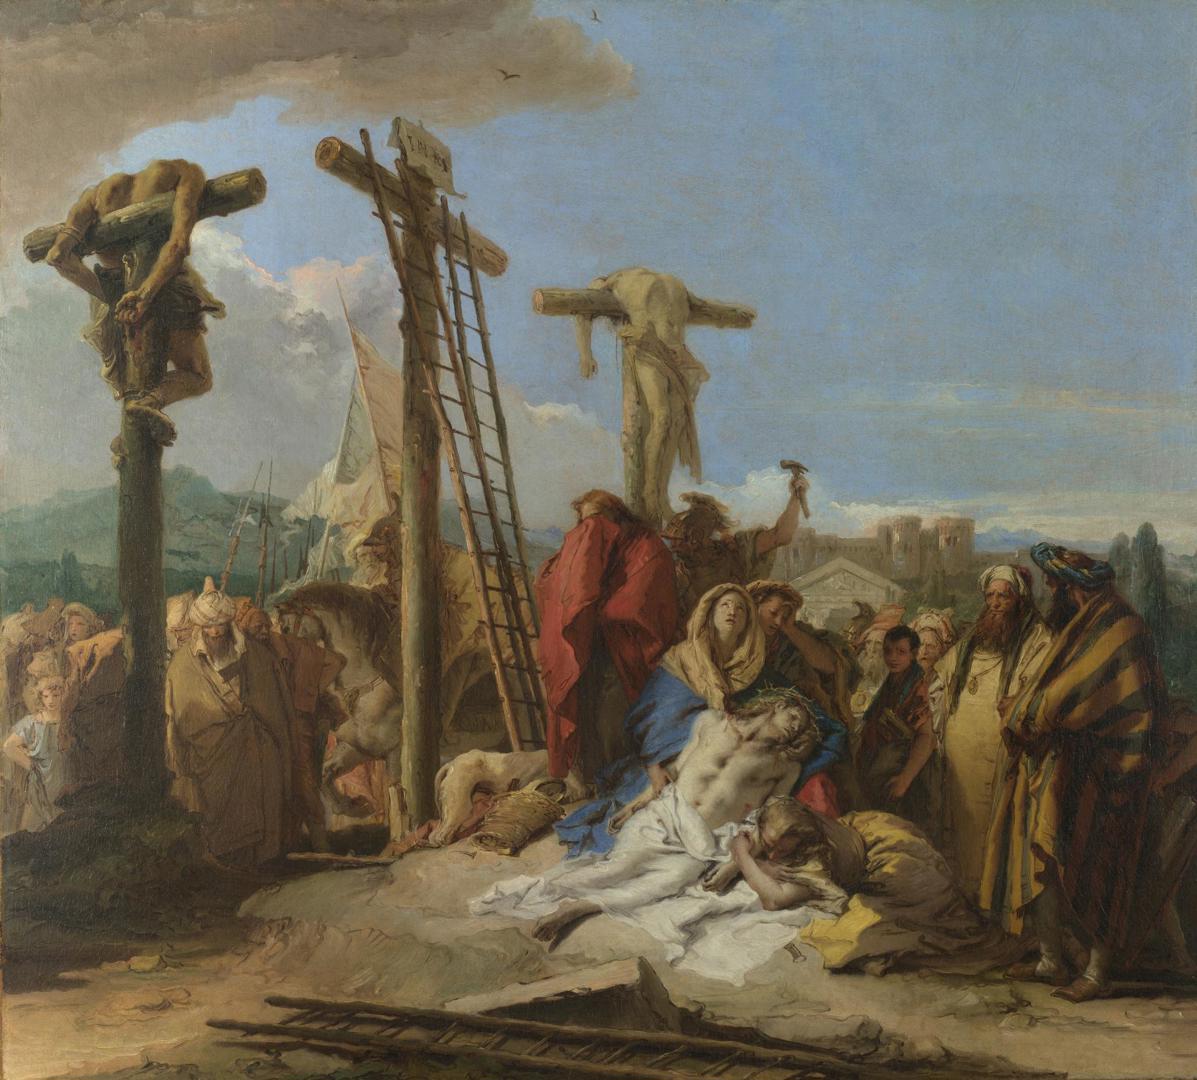 The Lamentation at the Foot of the Cross by Giovanni Domenico Tiepolo